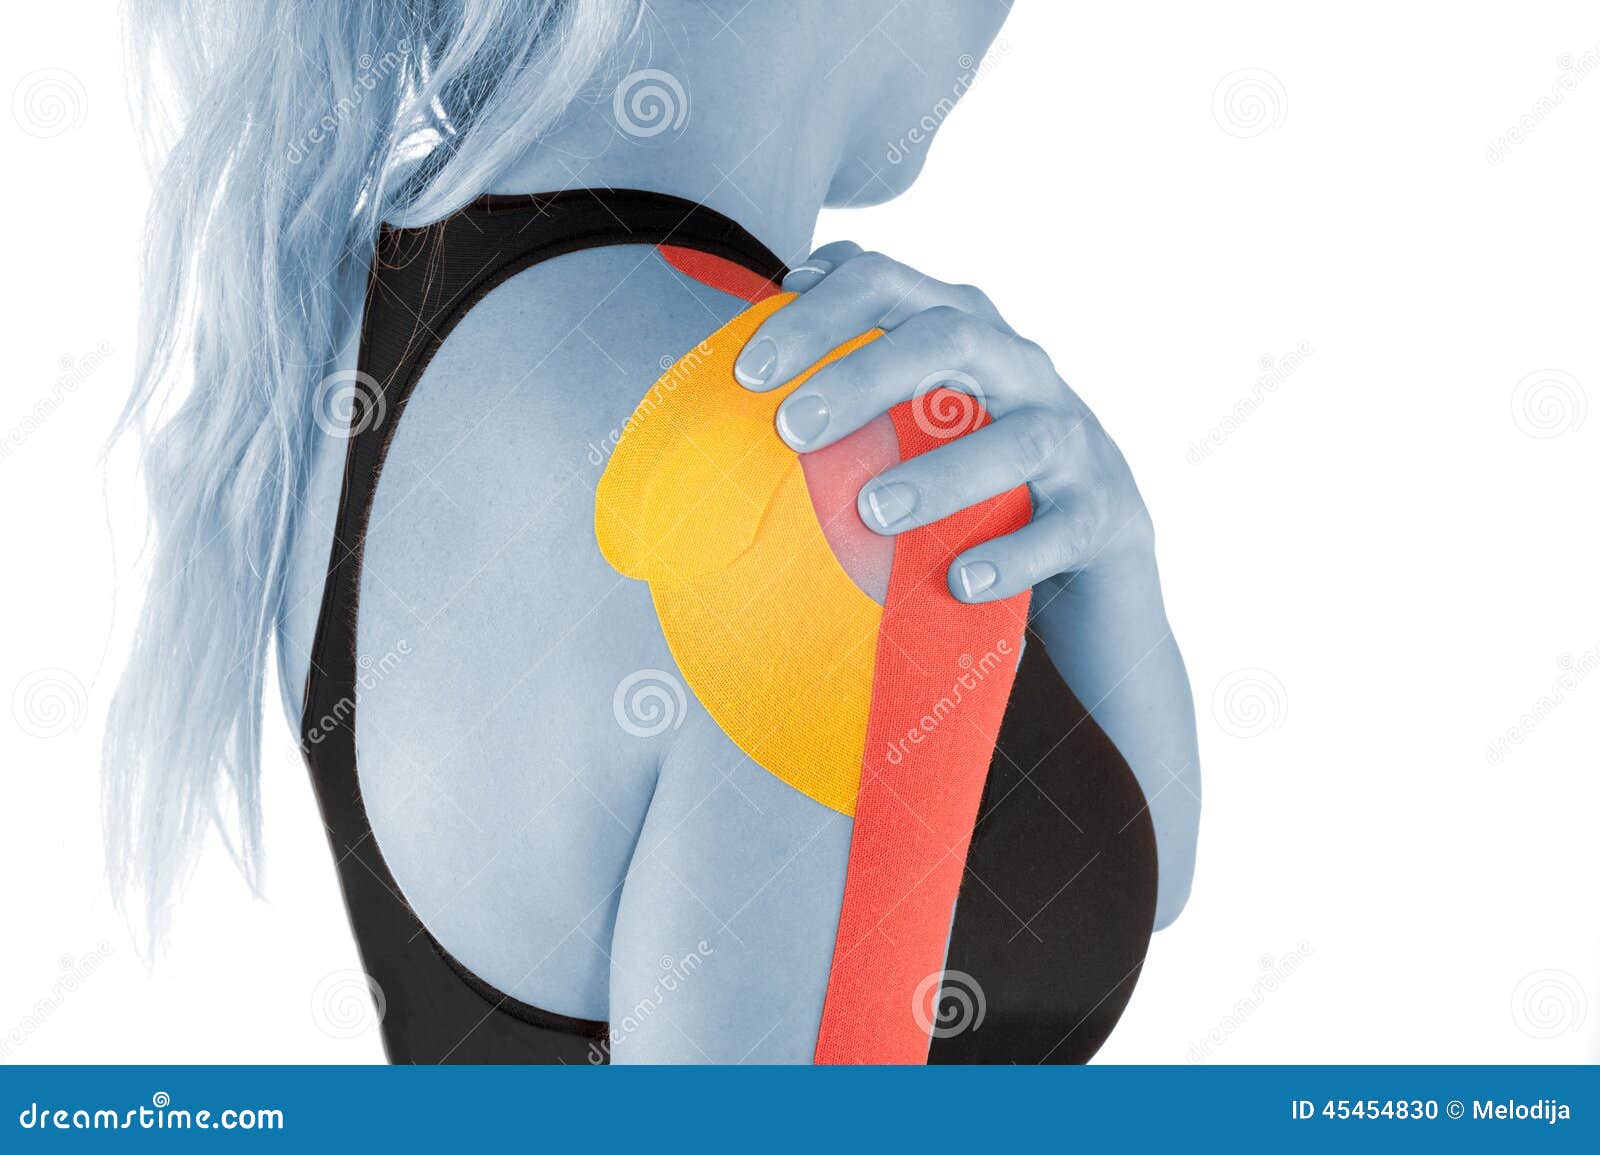 Therapy with tex tape stock photo. Image of pain, arthritis - 45454830